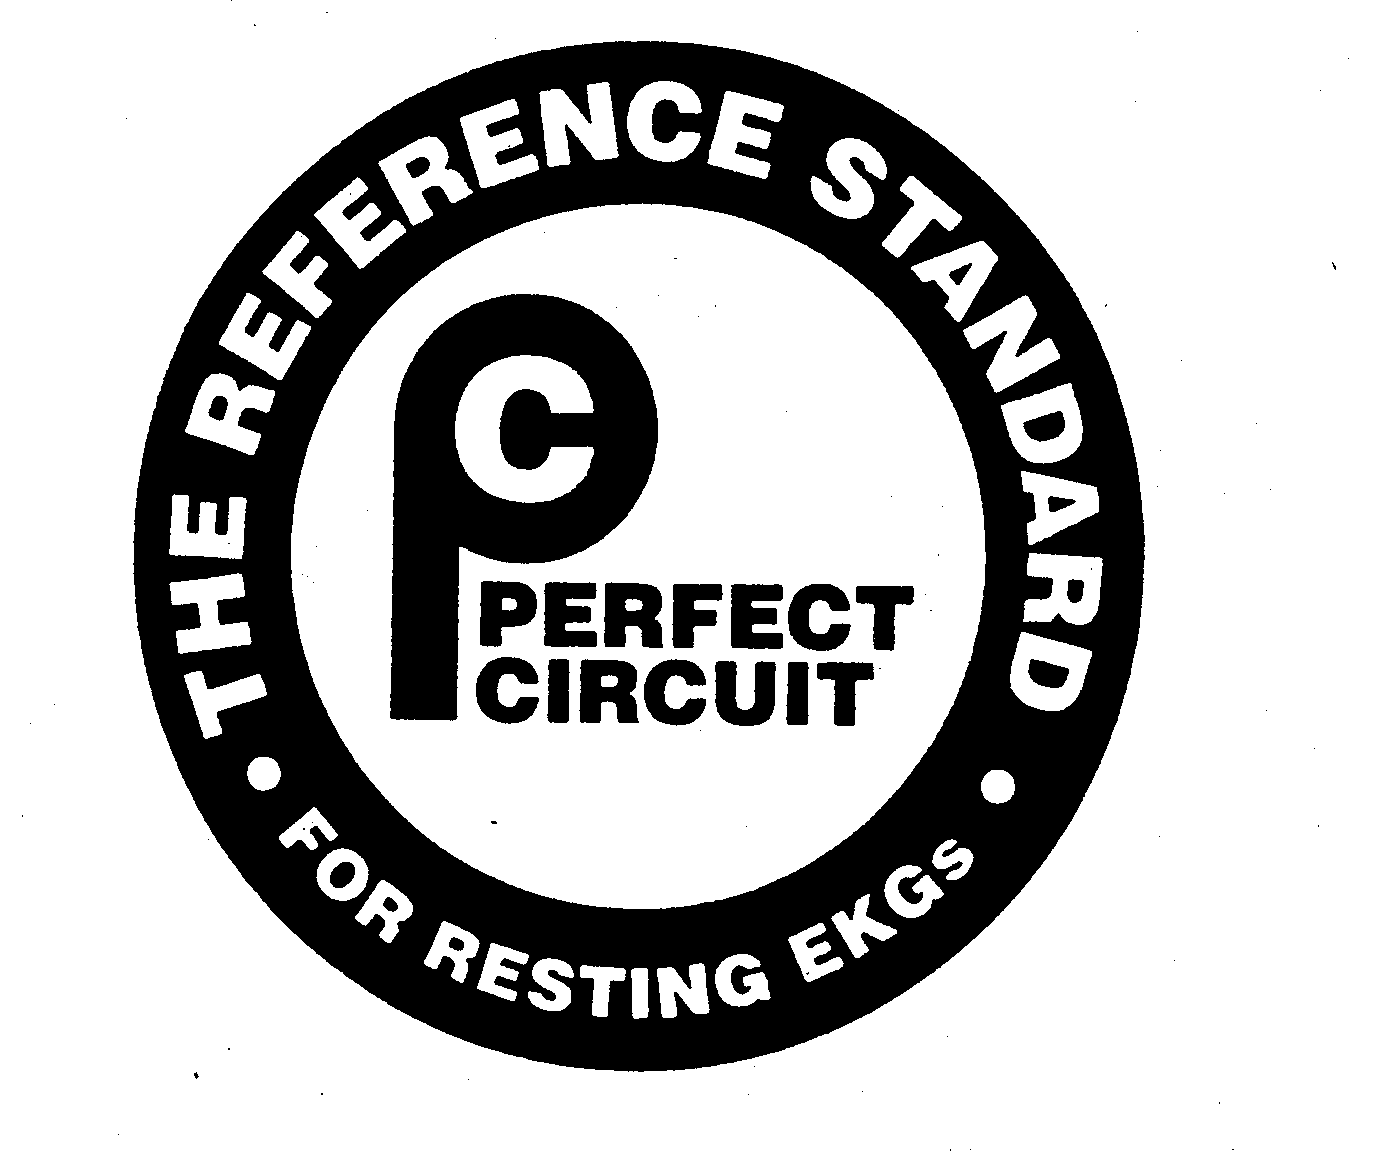  PC PERFECT CIRCUIT THE REFERENCE STANDARD FOR RESTING EKGS